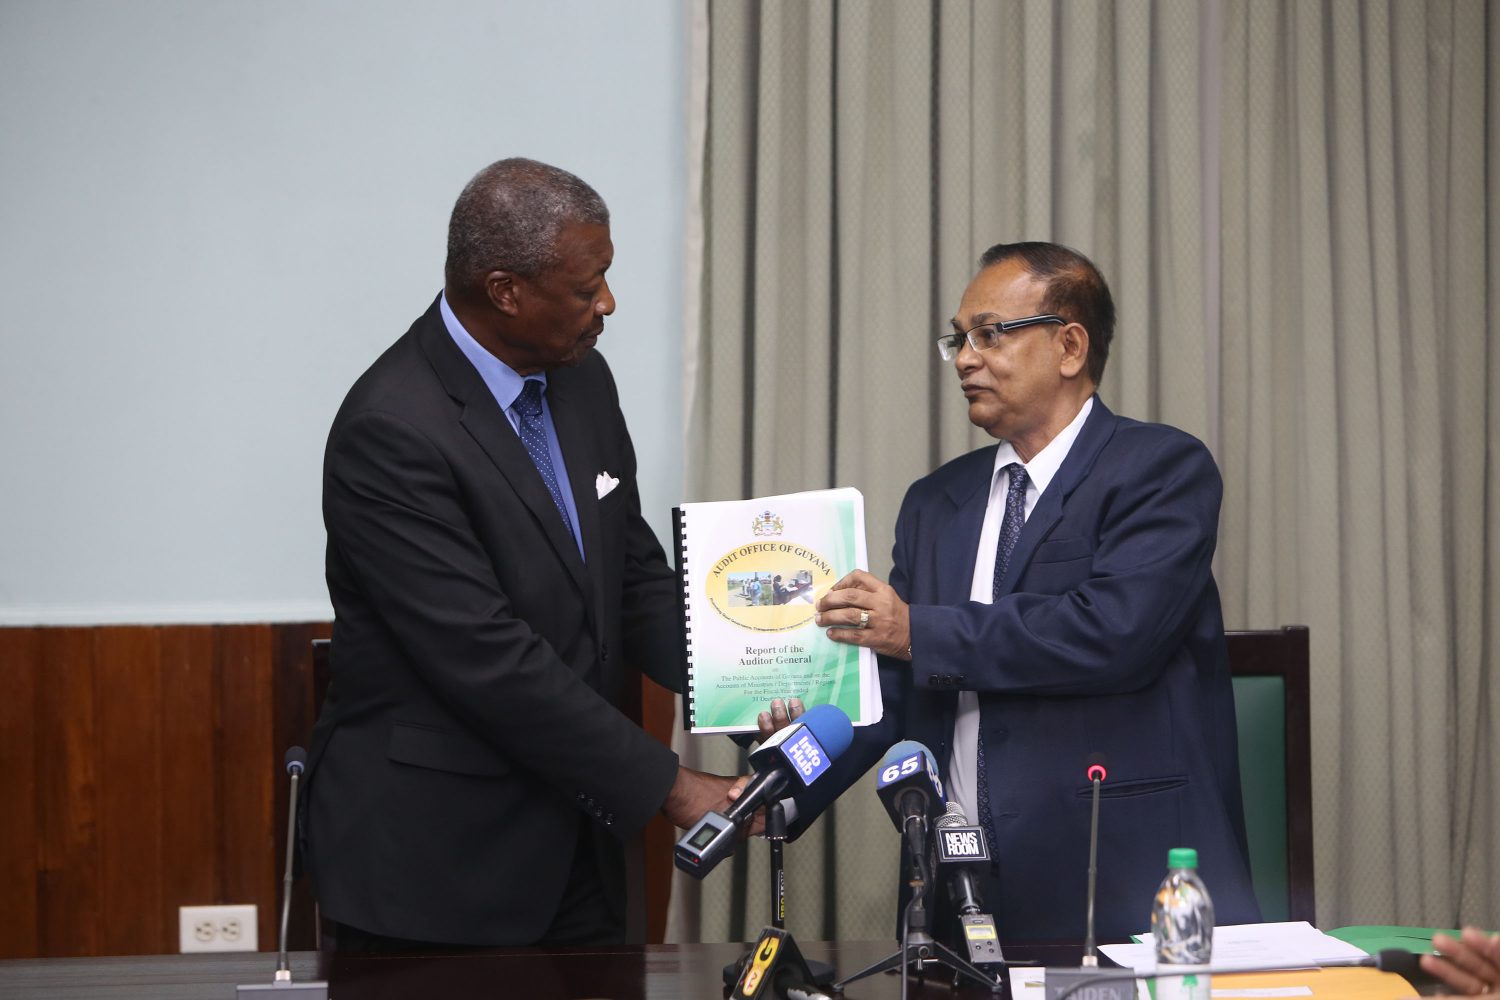 Auditor General Deodat Sharma (right) hands over the 2016 Audit Report to Speaker of the National Assembly Barton Scotland.